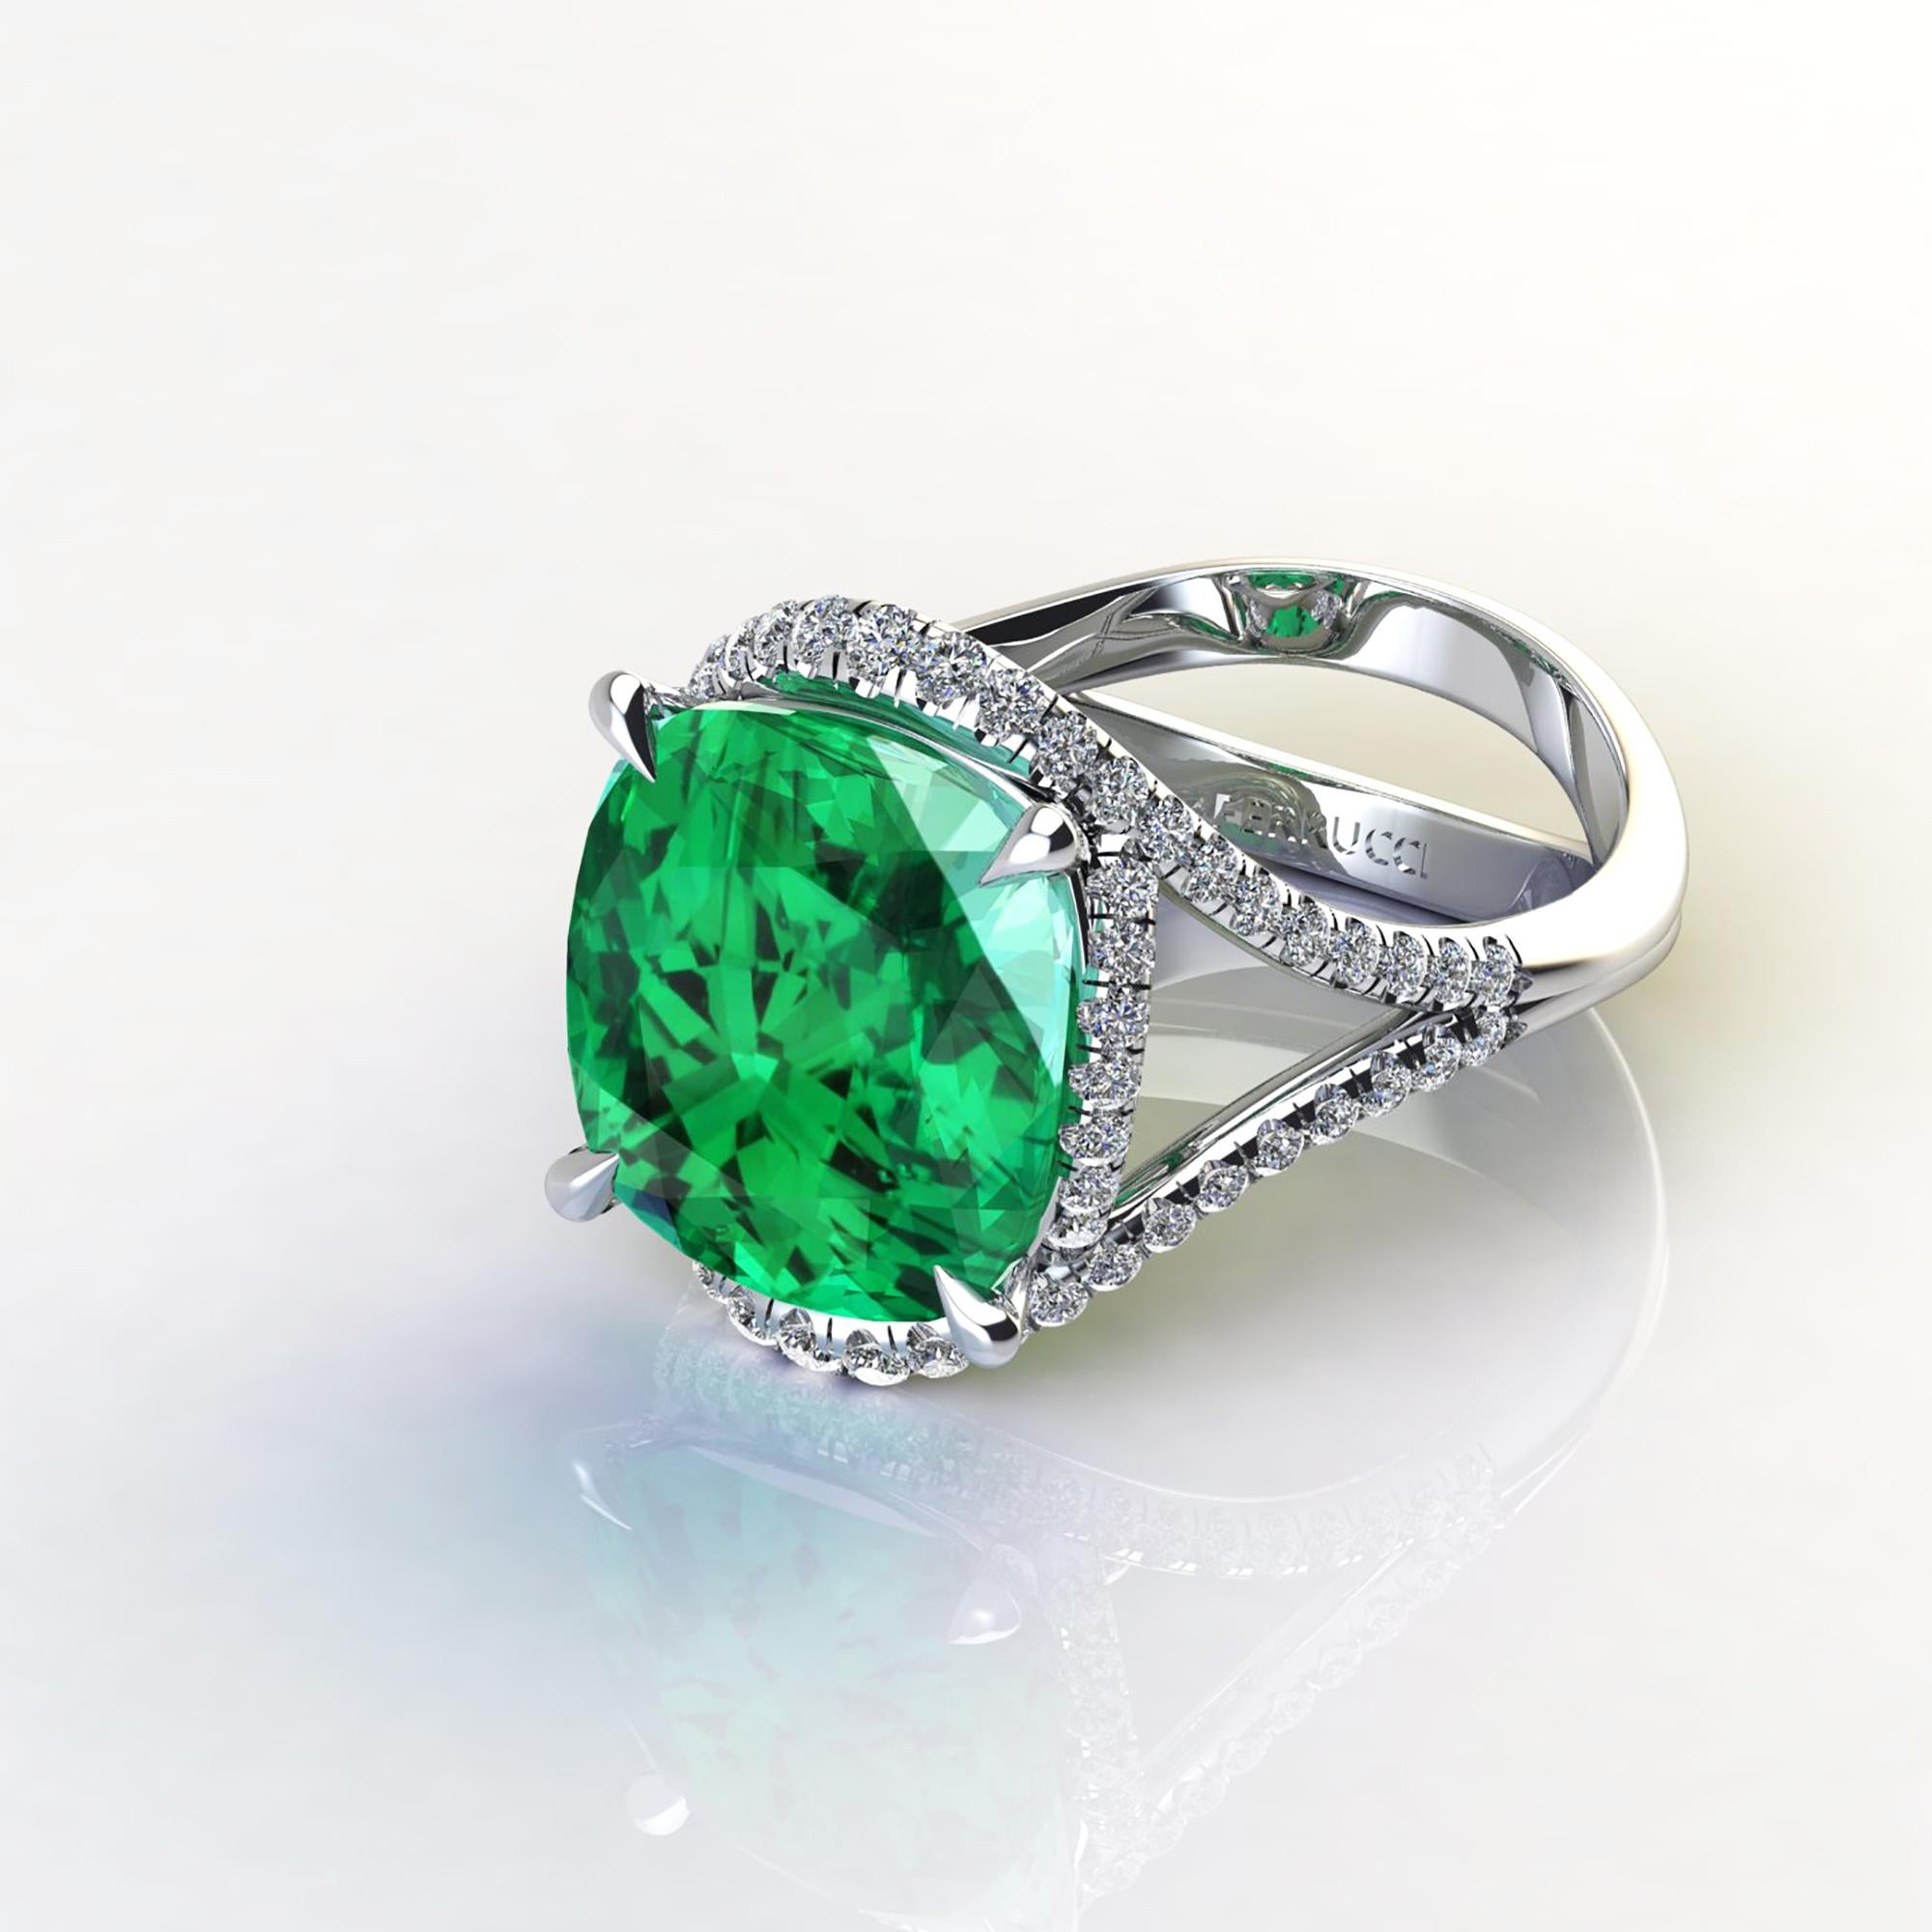 5 Carat Green Tourmaline Cushion Cut Diamonds Platinum 950 Cocktail Ring In New Condition For Sale In New York, NY